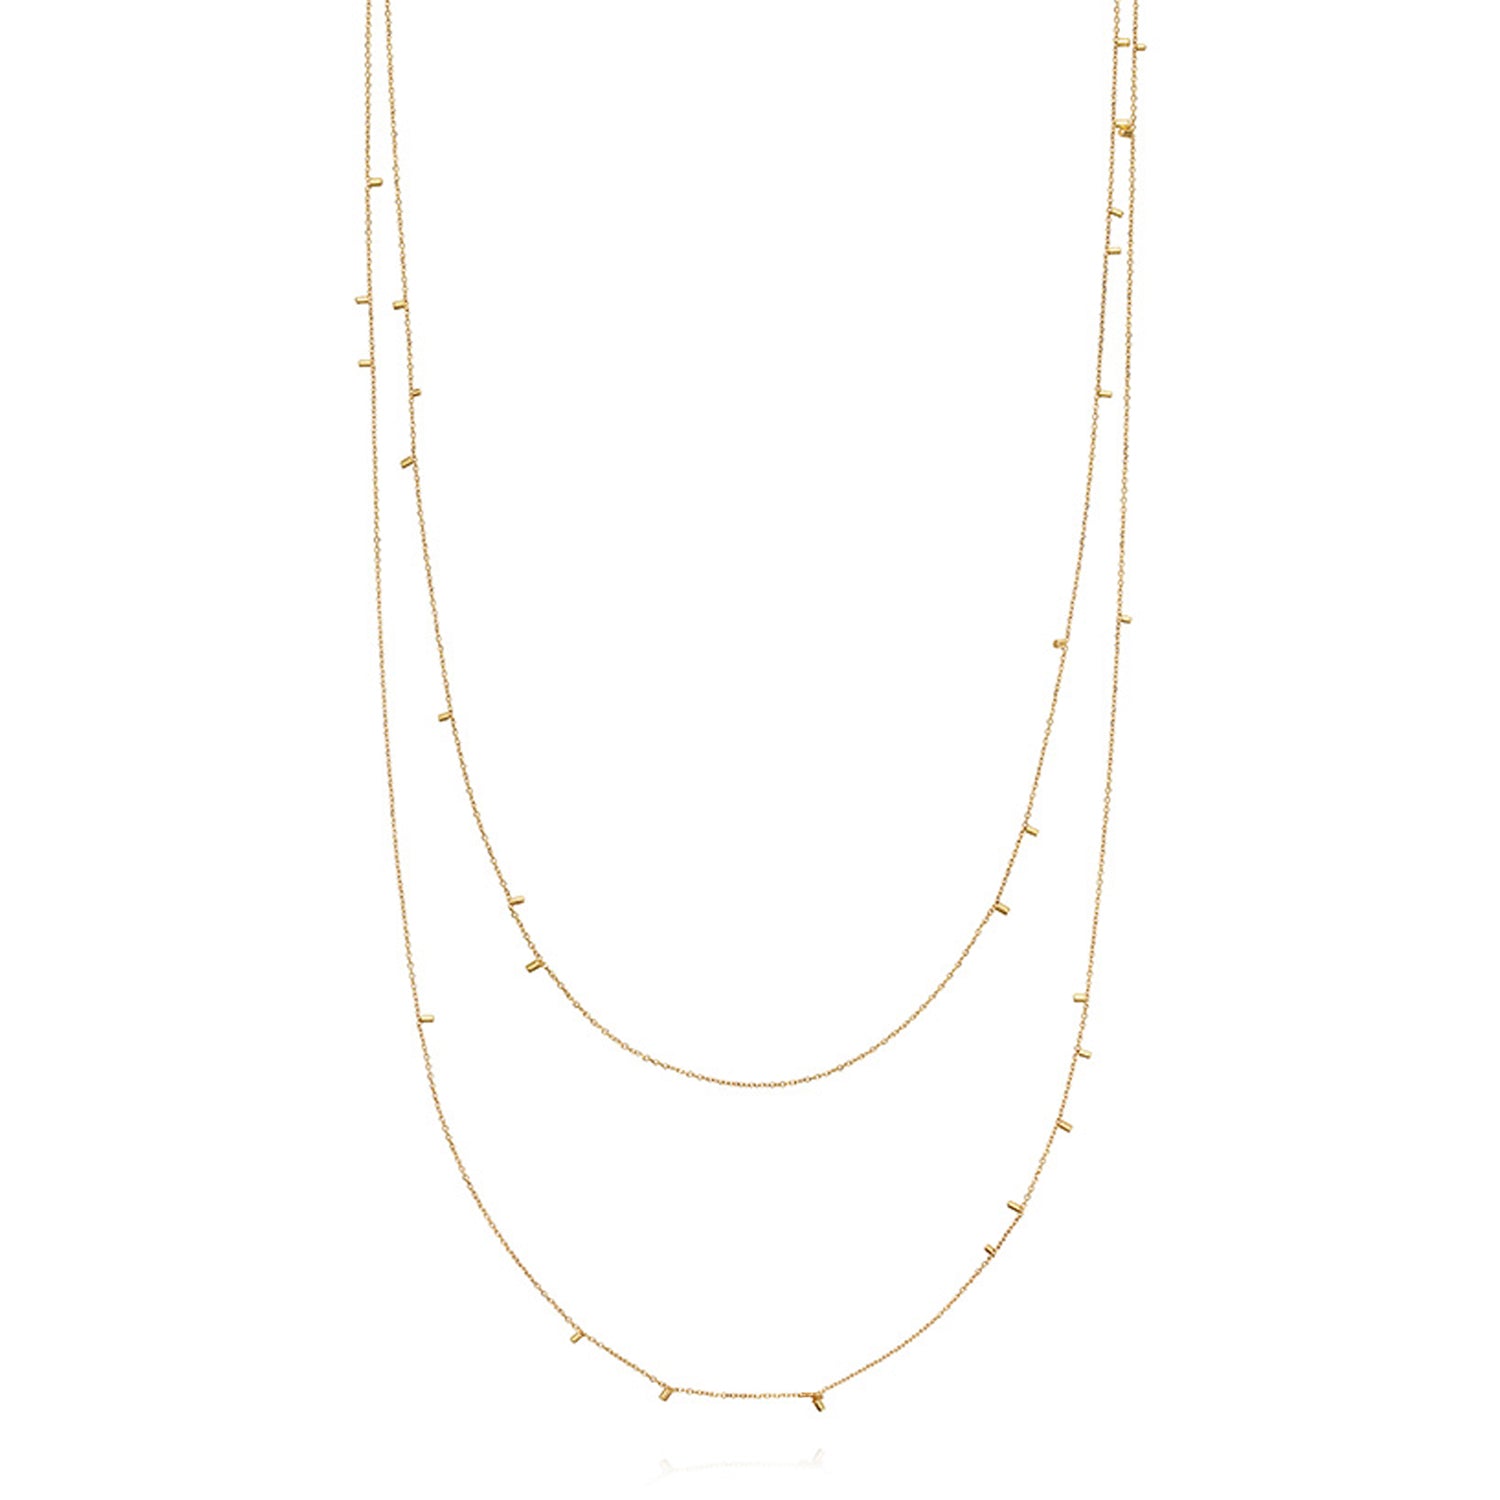 This fabulous long 18ct yellow necklace made of fine chain sprinkled with a shimmering of gold embellishments is part of our Gold Dust Collection